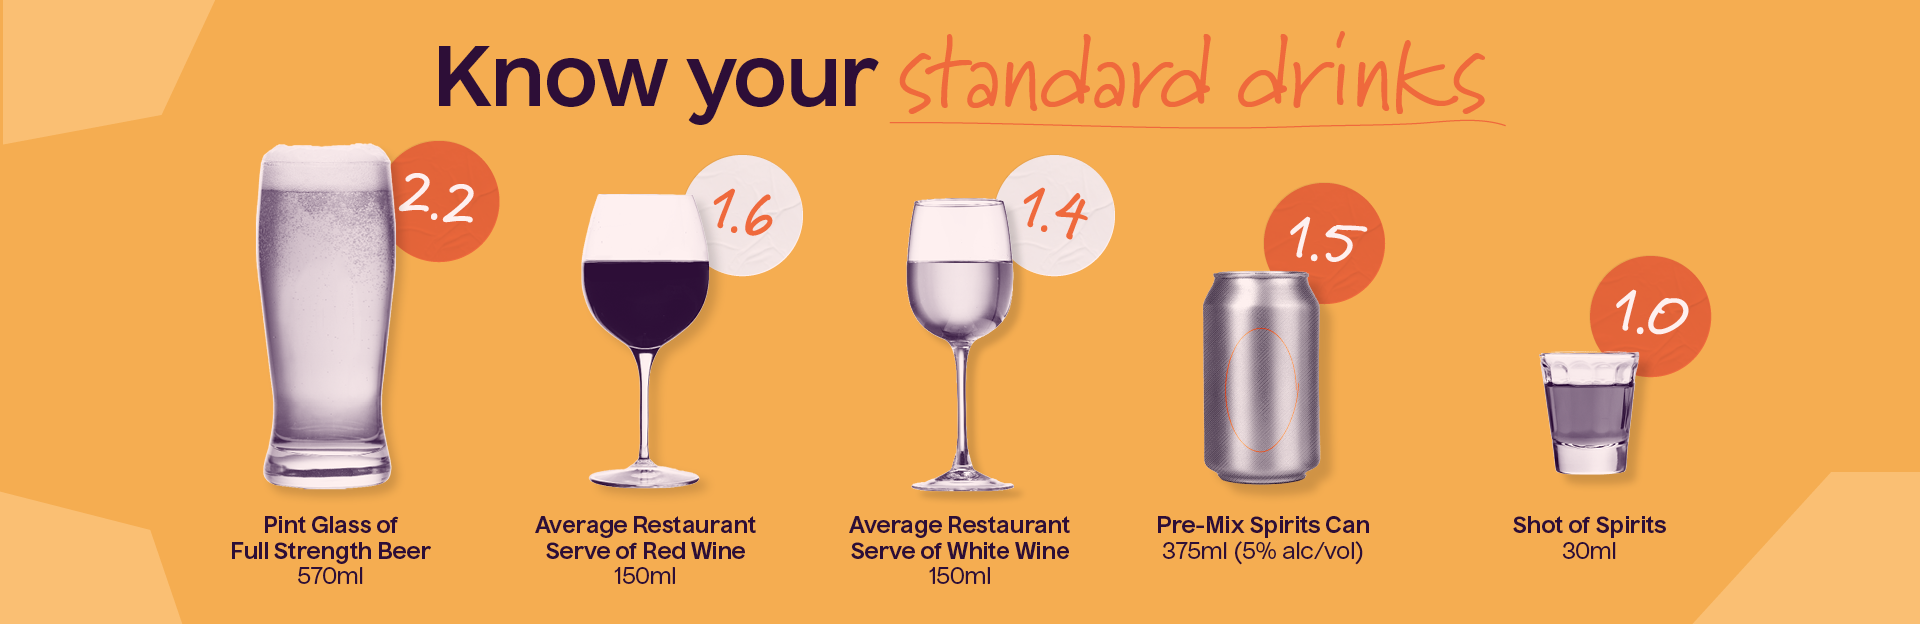 Know your standard drinks